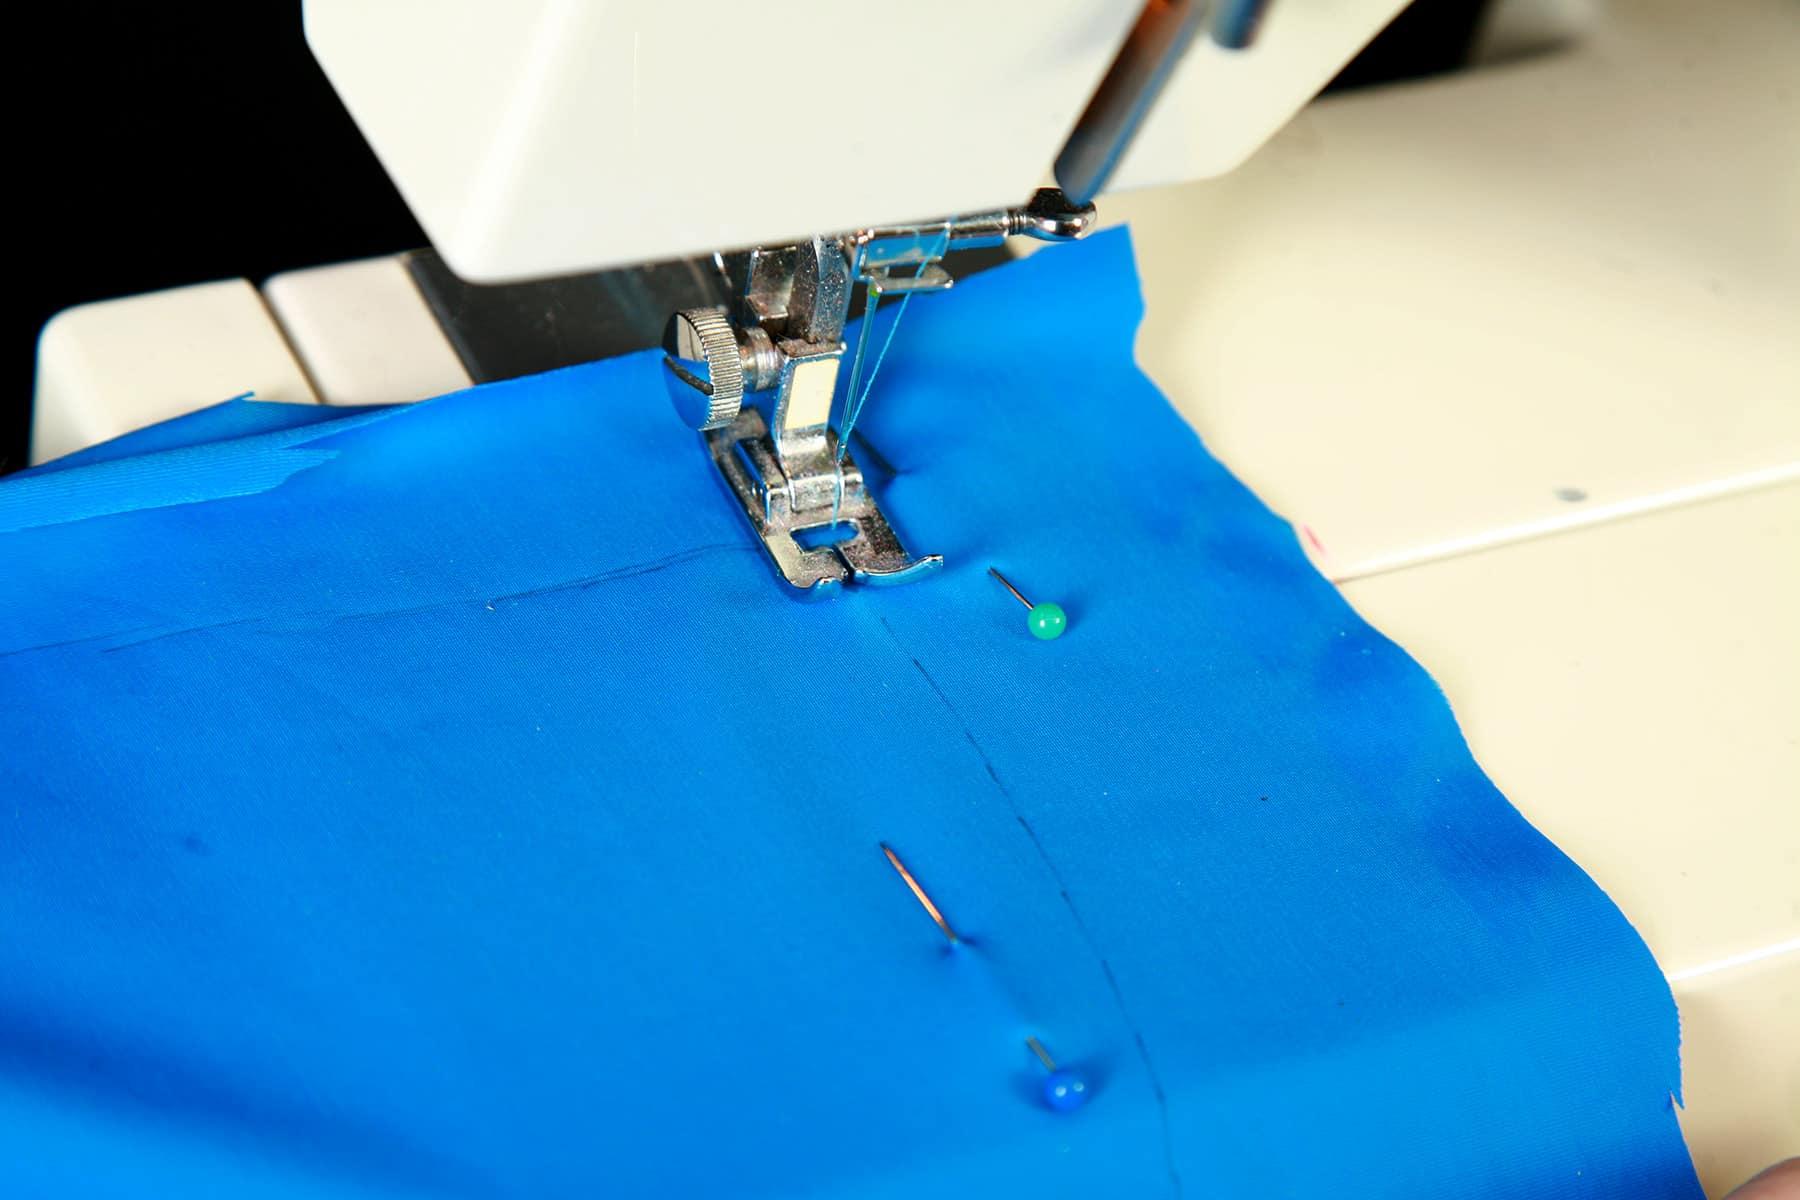 A sewing machine is set up to sew blue spandex fabric.